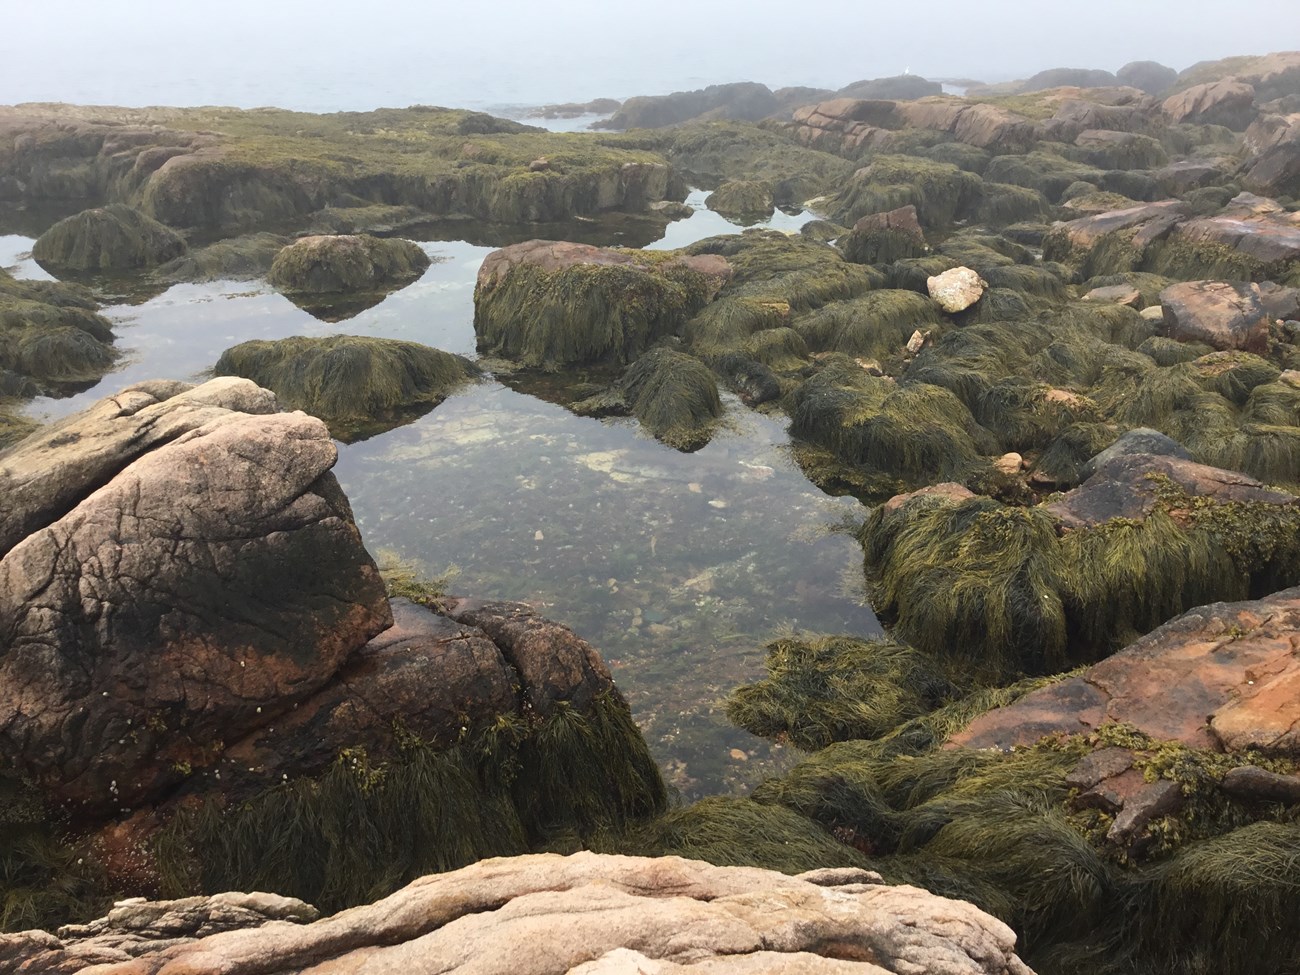 Coastline with large boulders covered in long seaweed and a large clear irregularly-shaped tidepool